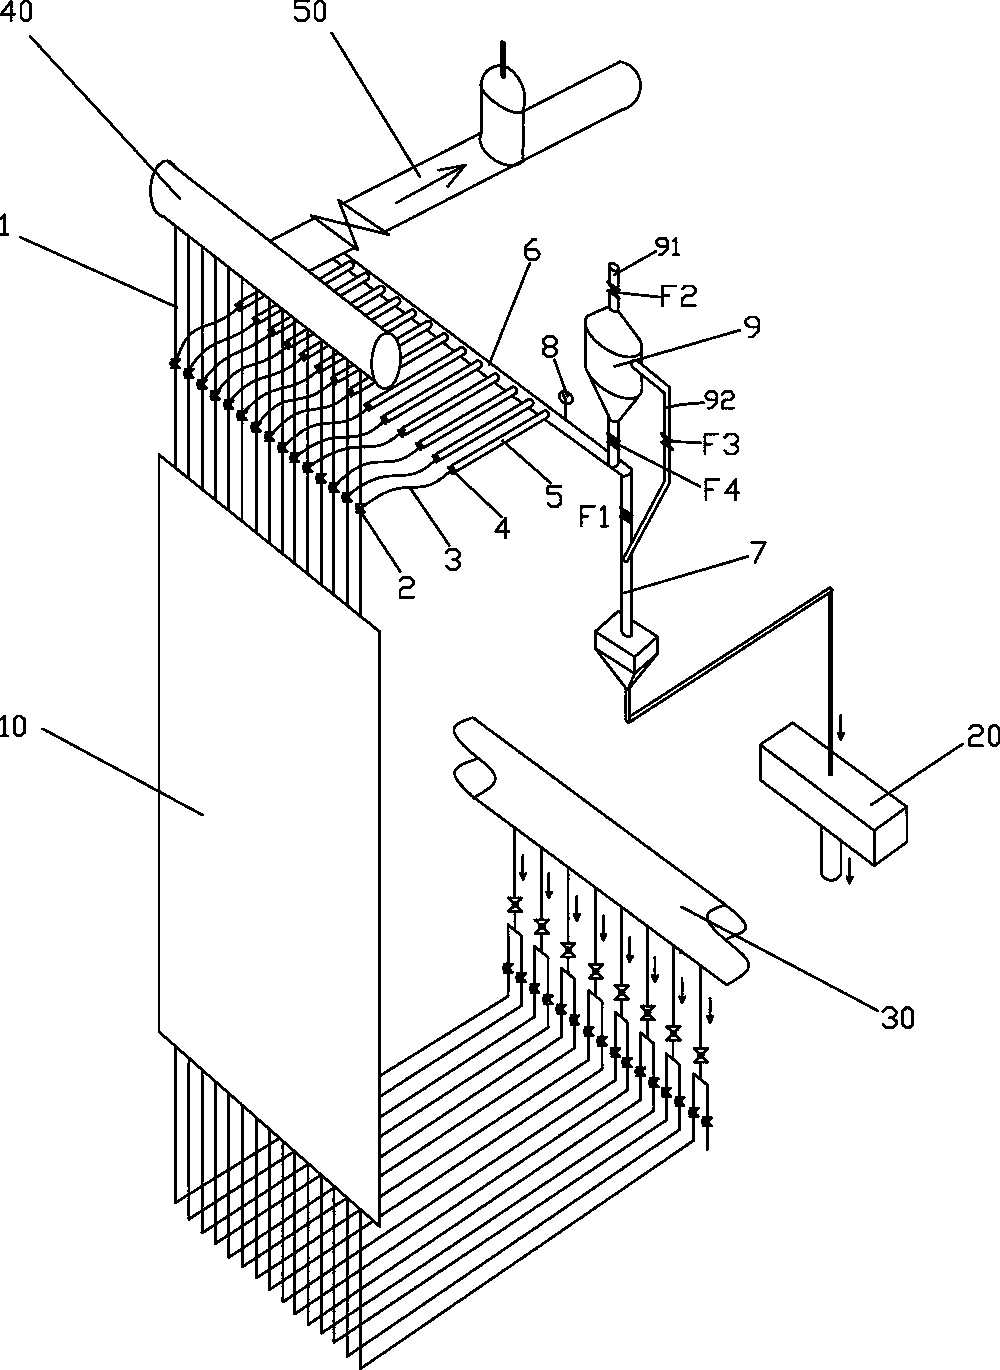 A centralized leak detection device and method for a closed cooling system of a blast furnace